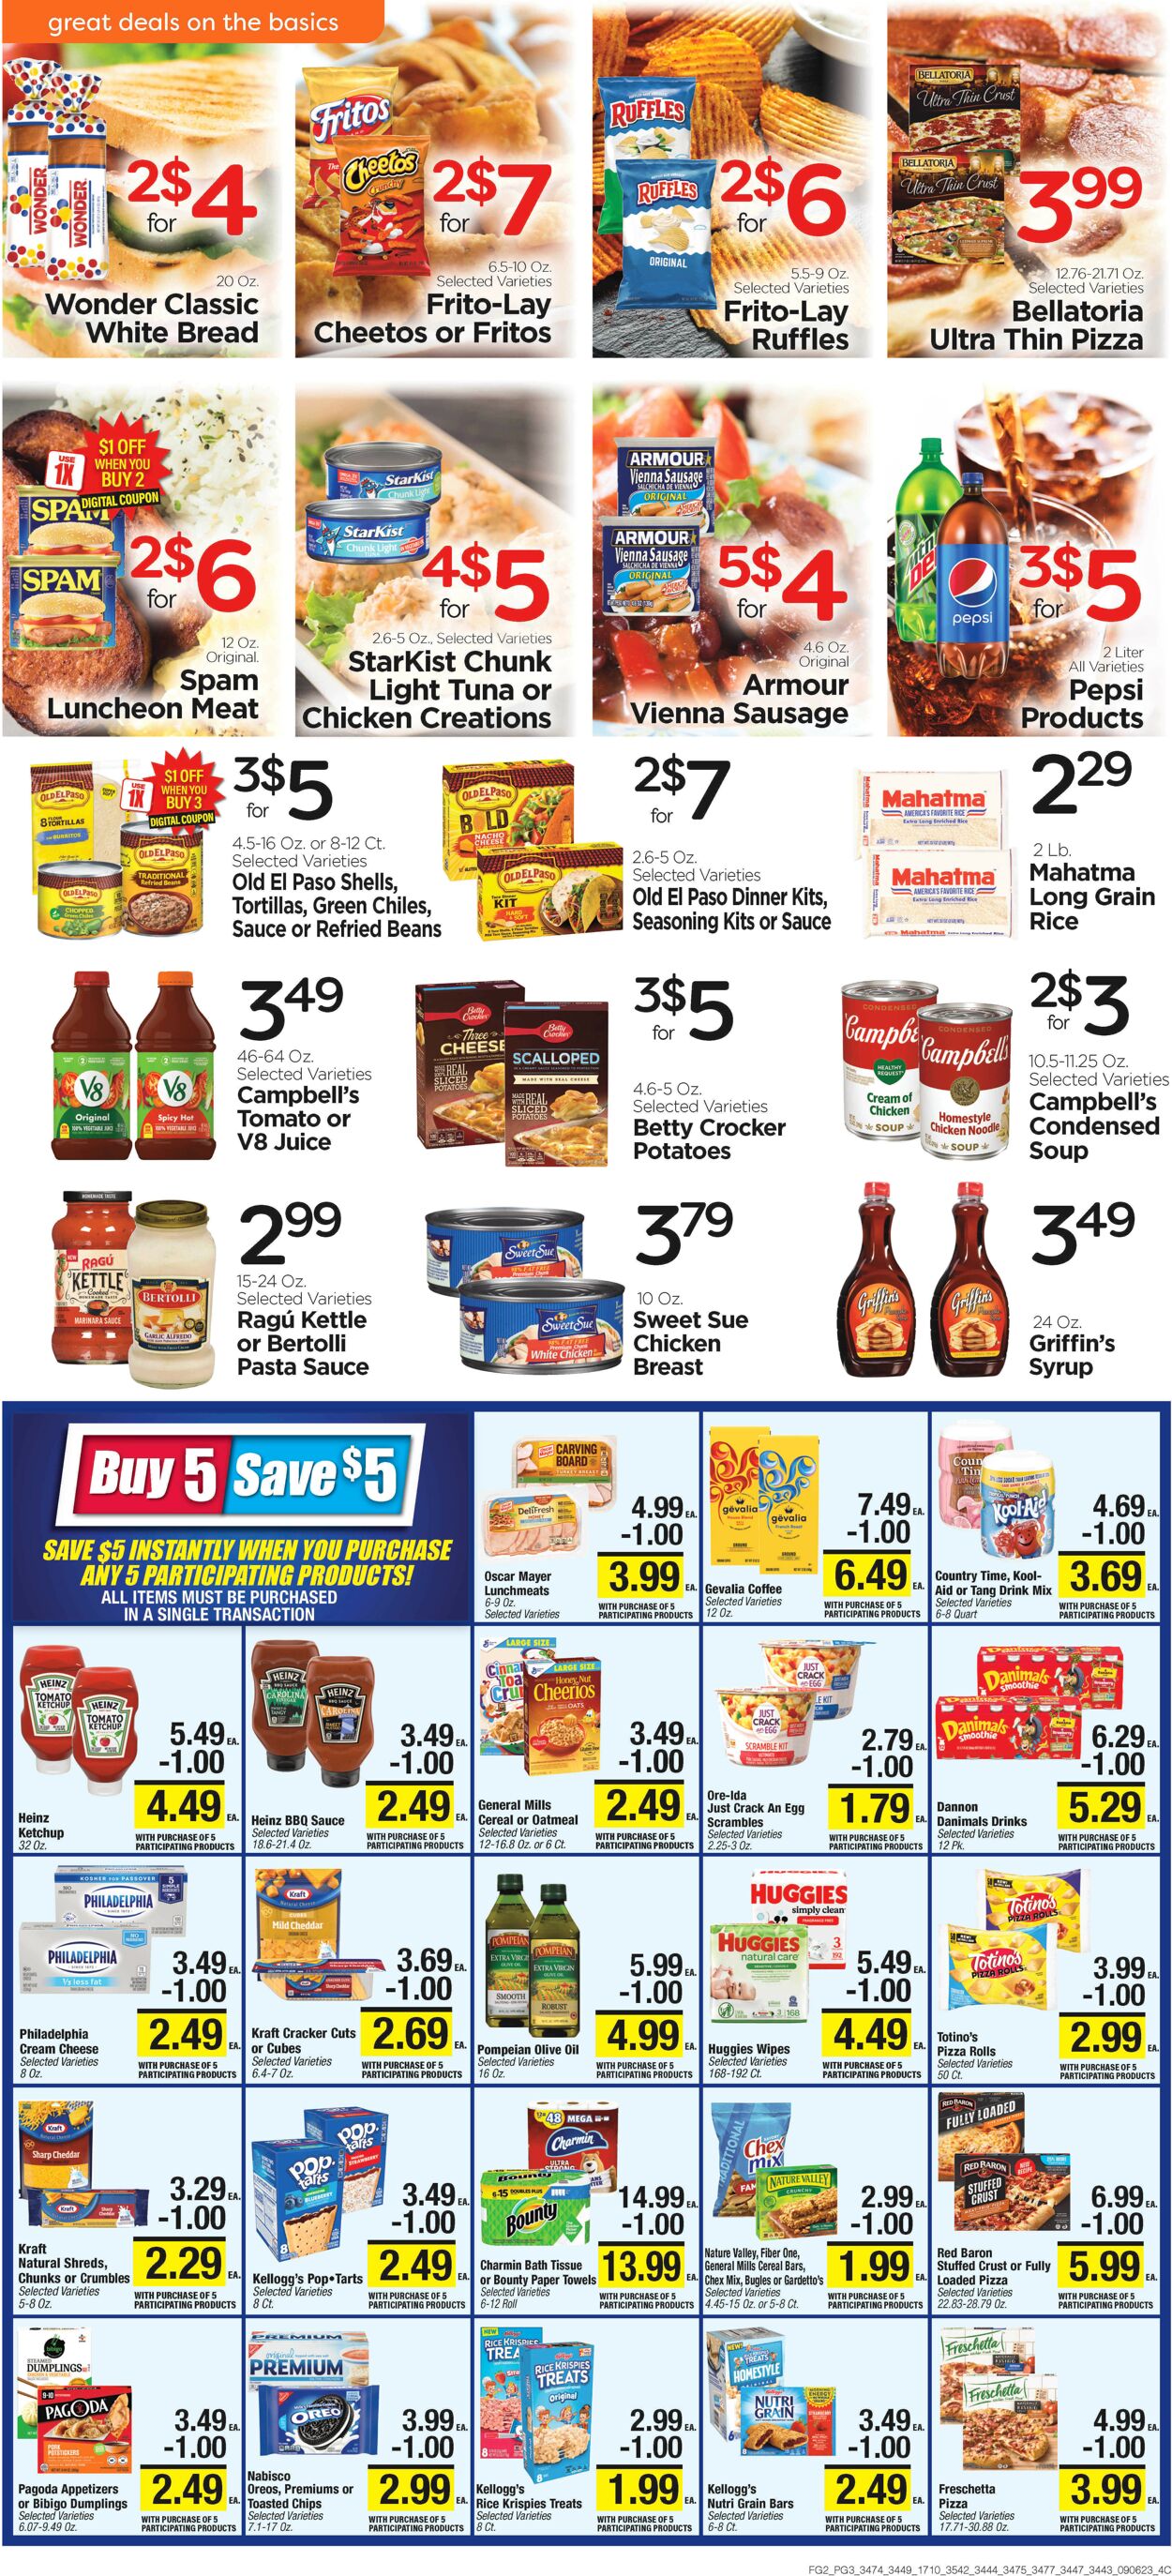 Catalogue Edwards Food Giant from 09/13/2023